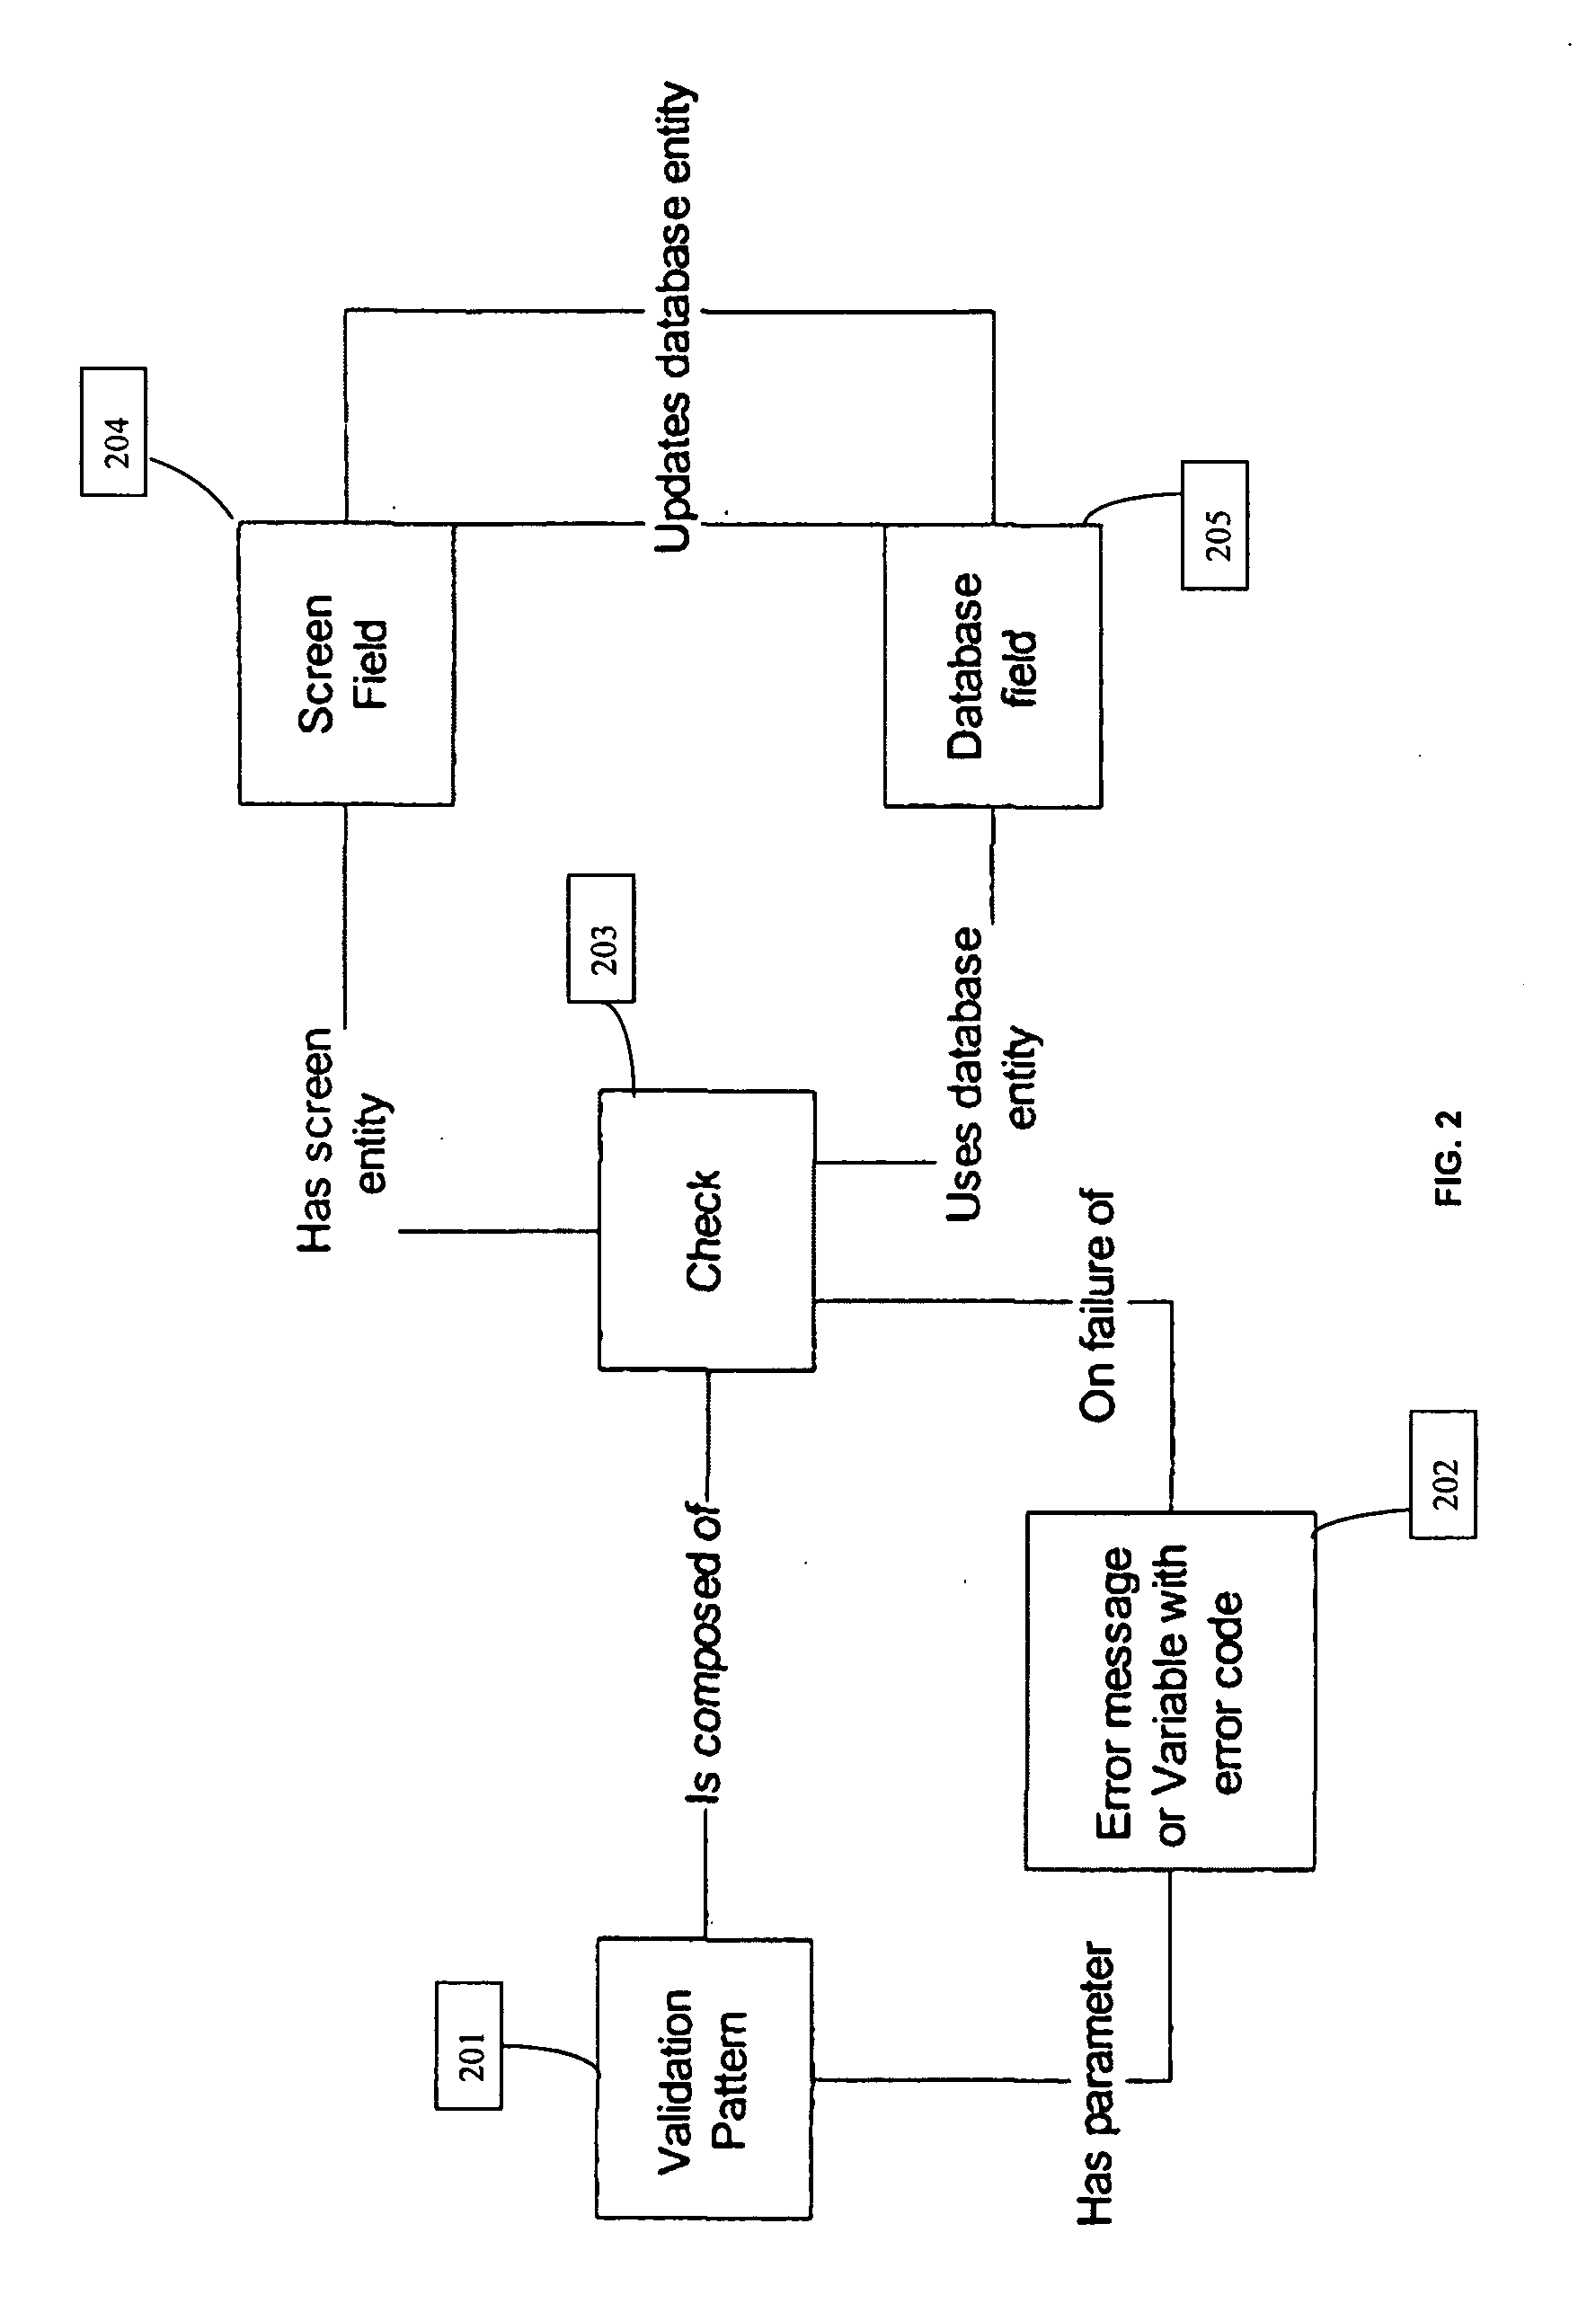 System and method for automated re-architectureing of legacy systems using object oriented language